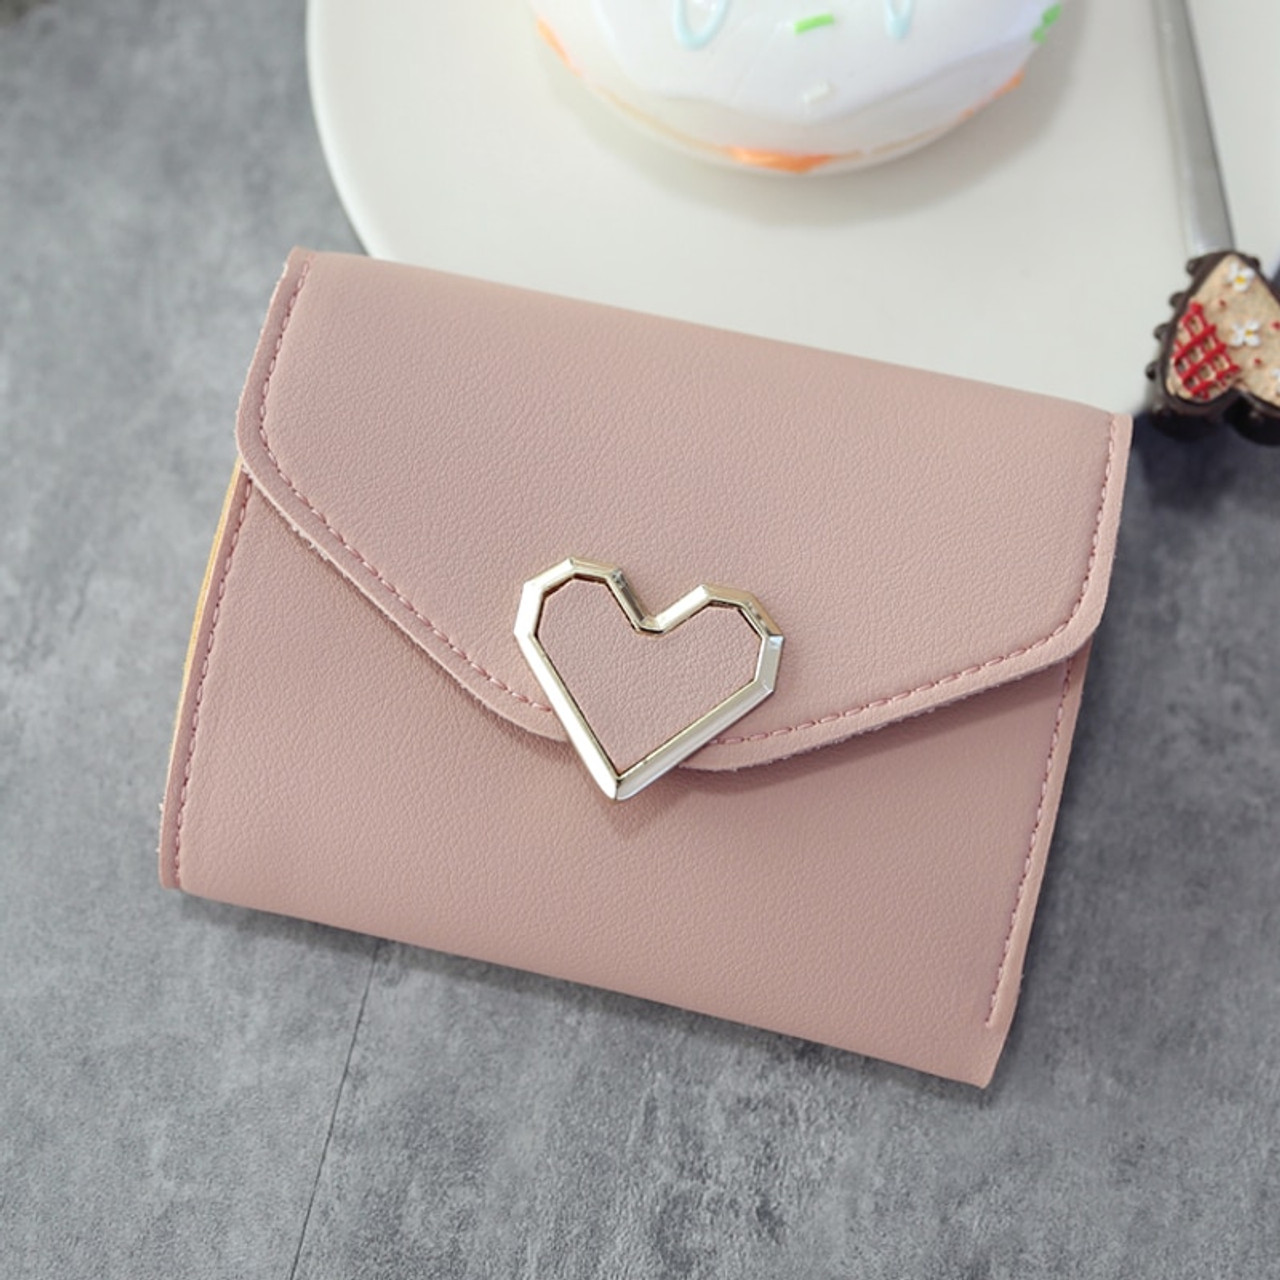 Fashion Women Wallet Cute Cat Short Wallet Leather Small Purse Girls Money  Bag Card Holder Ladies Female Hasp Gifts Color Black